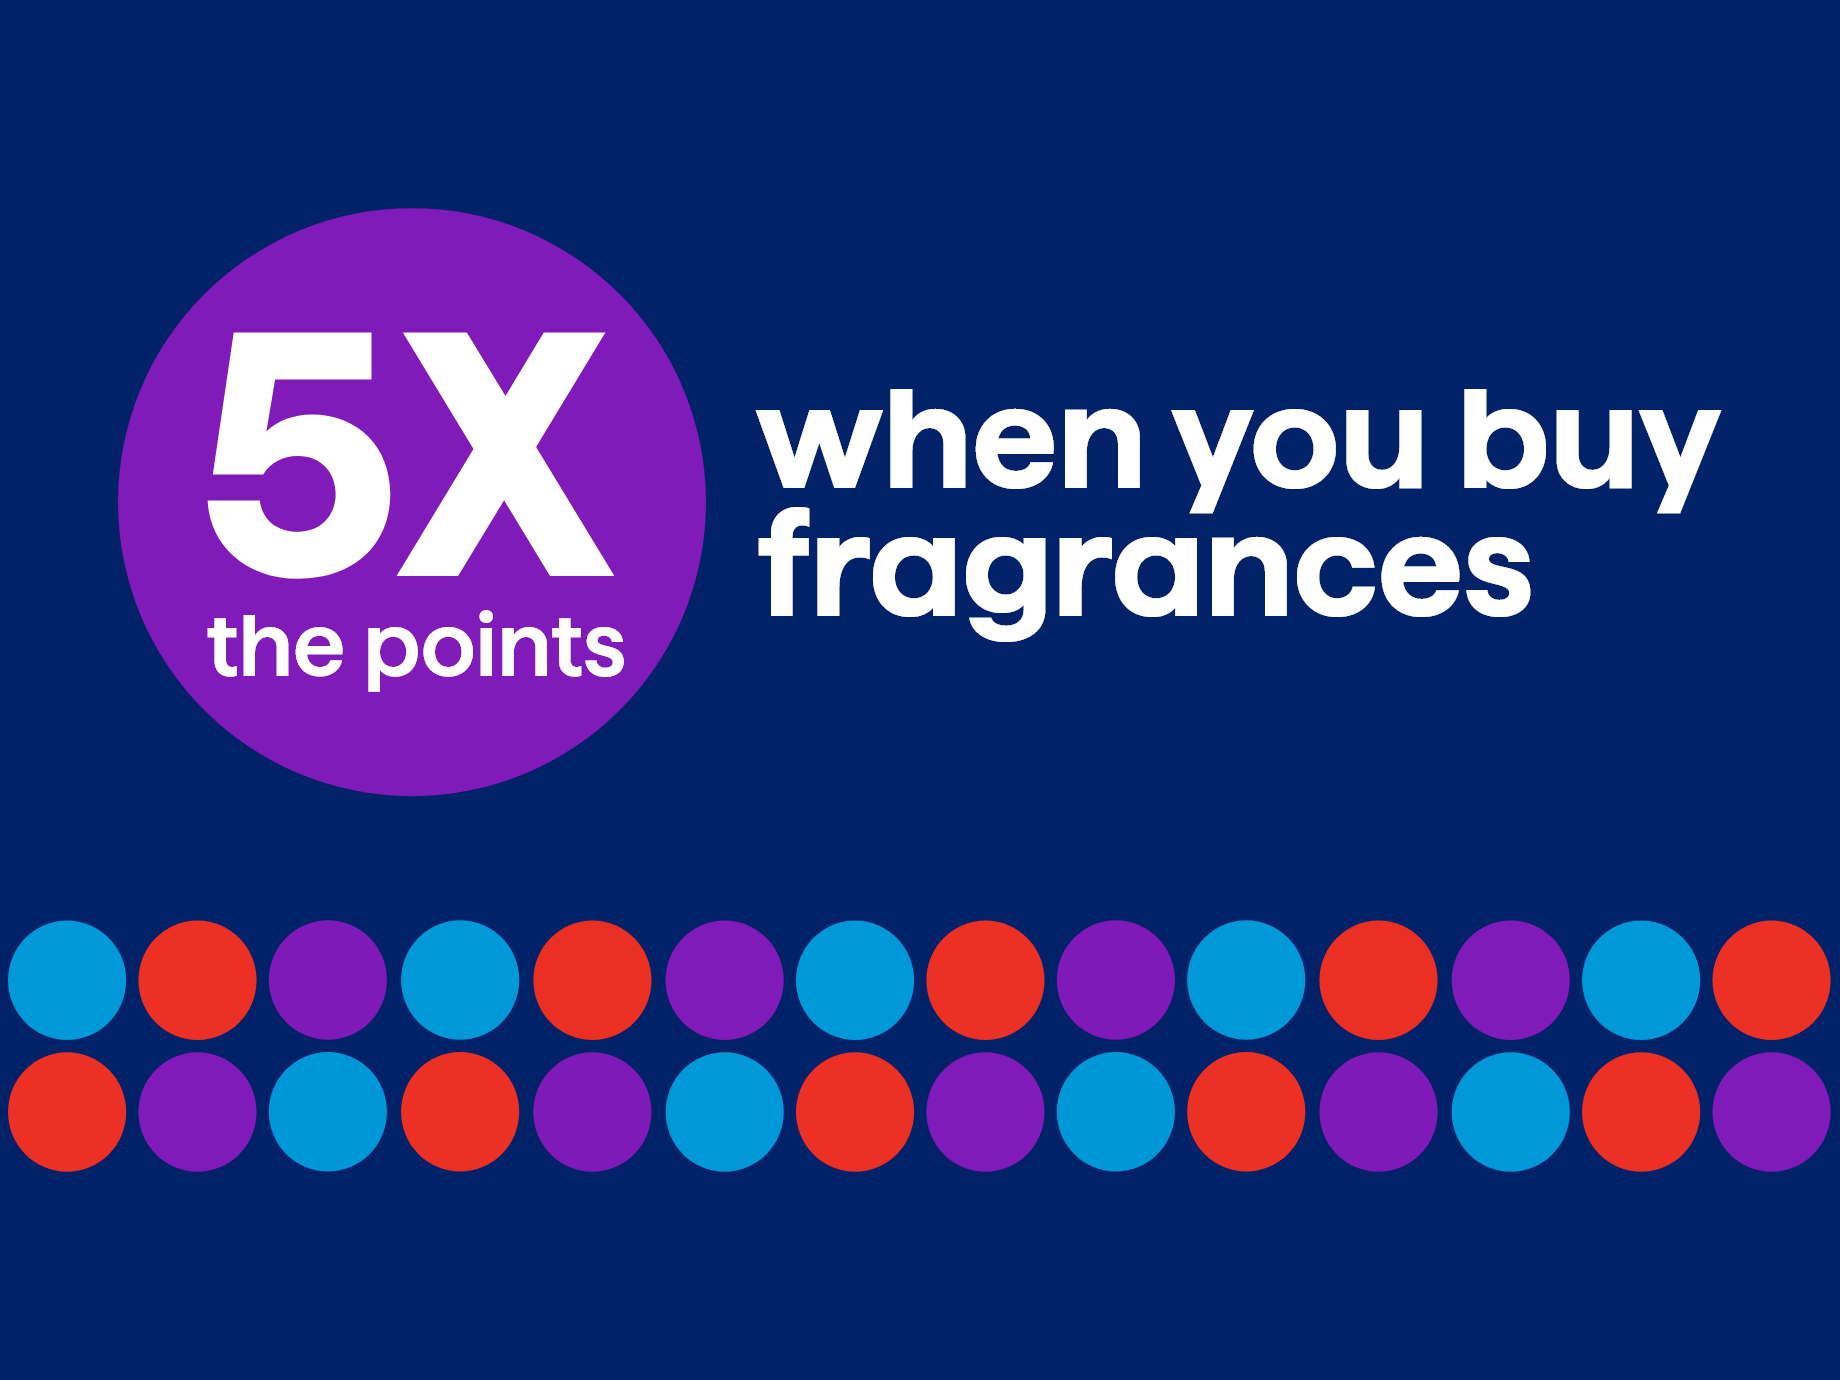 5x the points when you buy fragrances